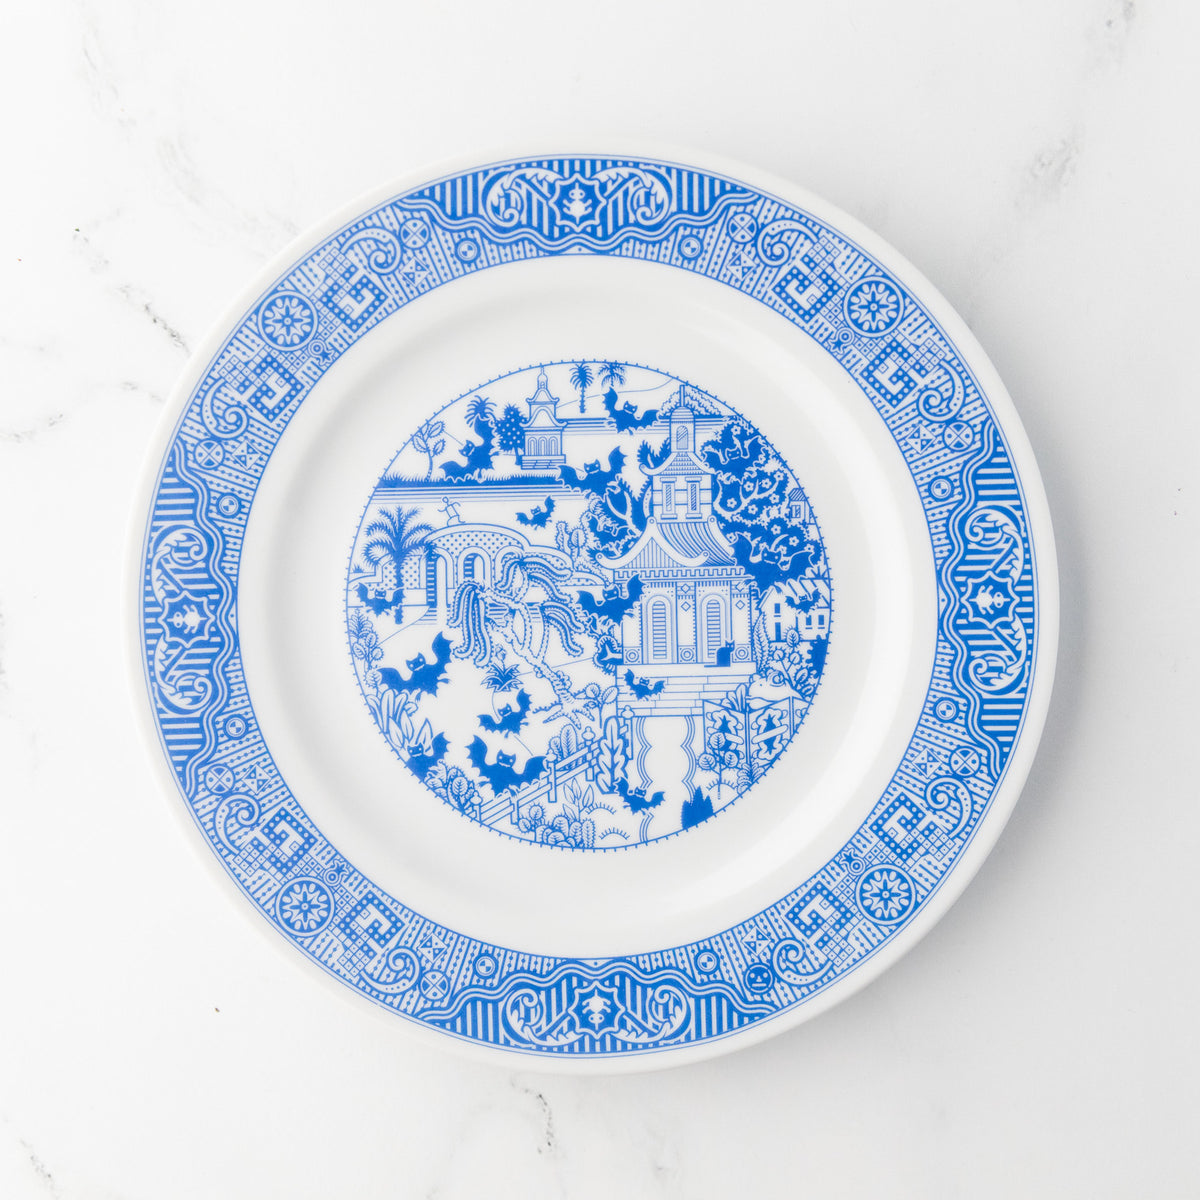 Now What? Small Plates (Set of 4)